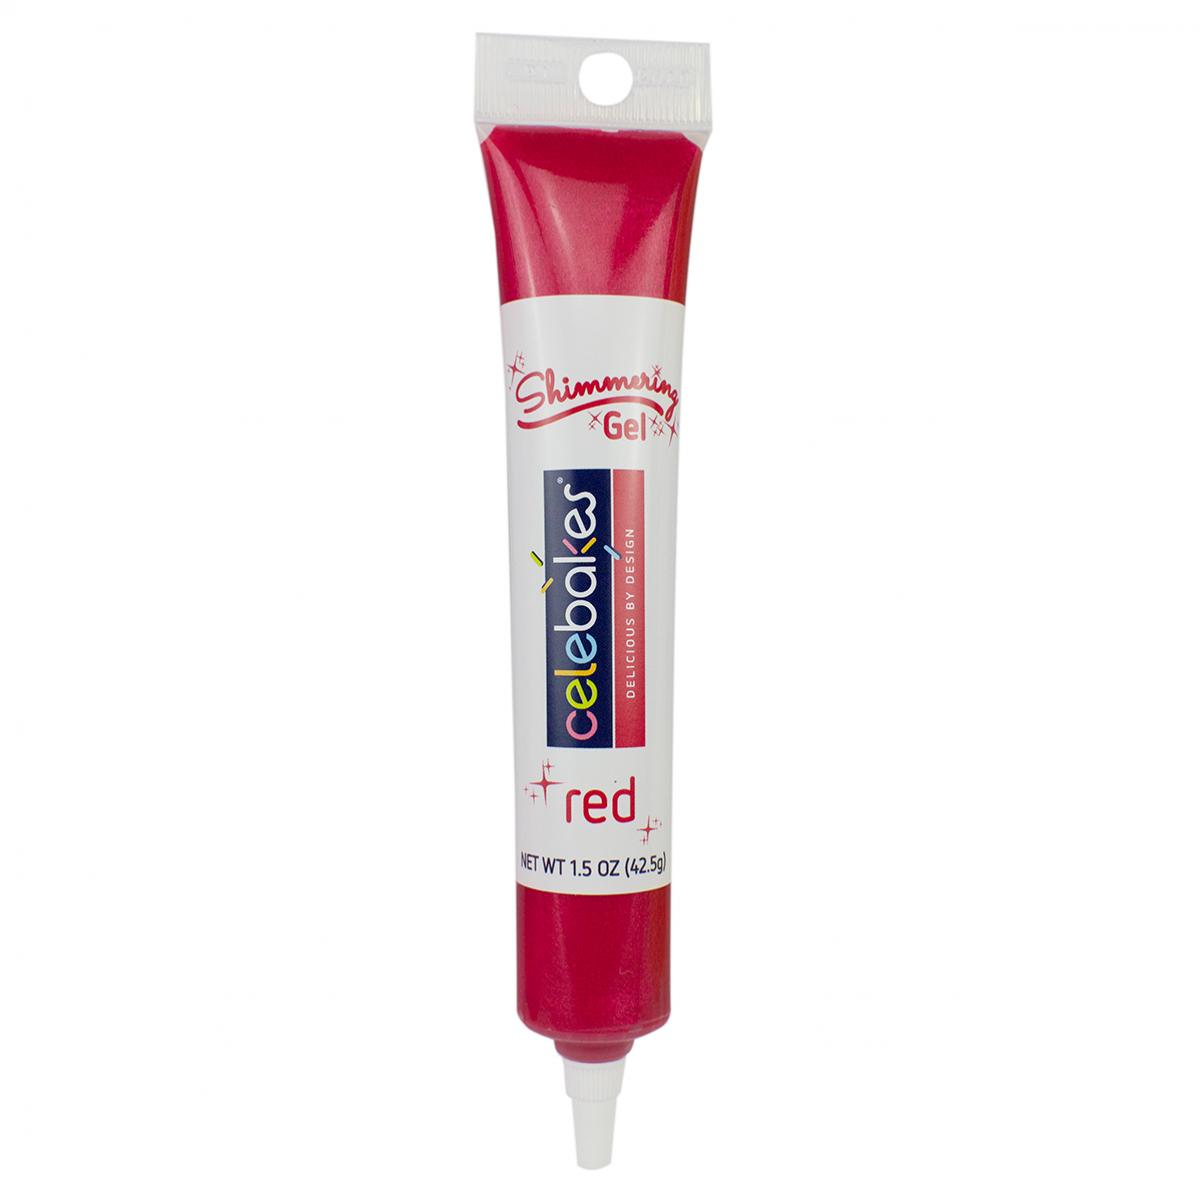 Shimmering Red Gel - 1.5 ounce